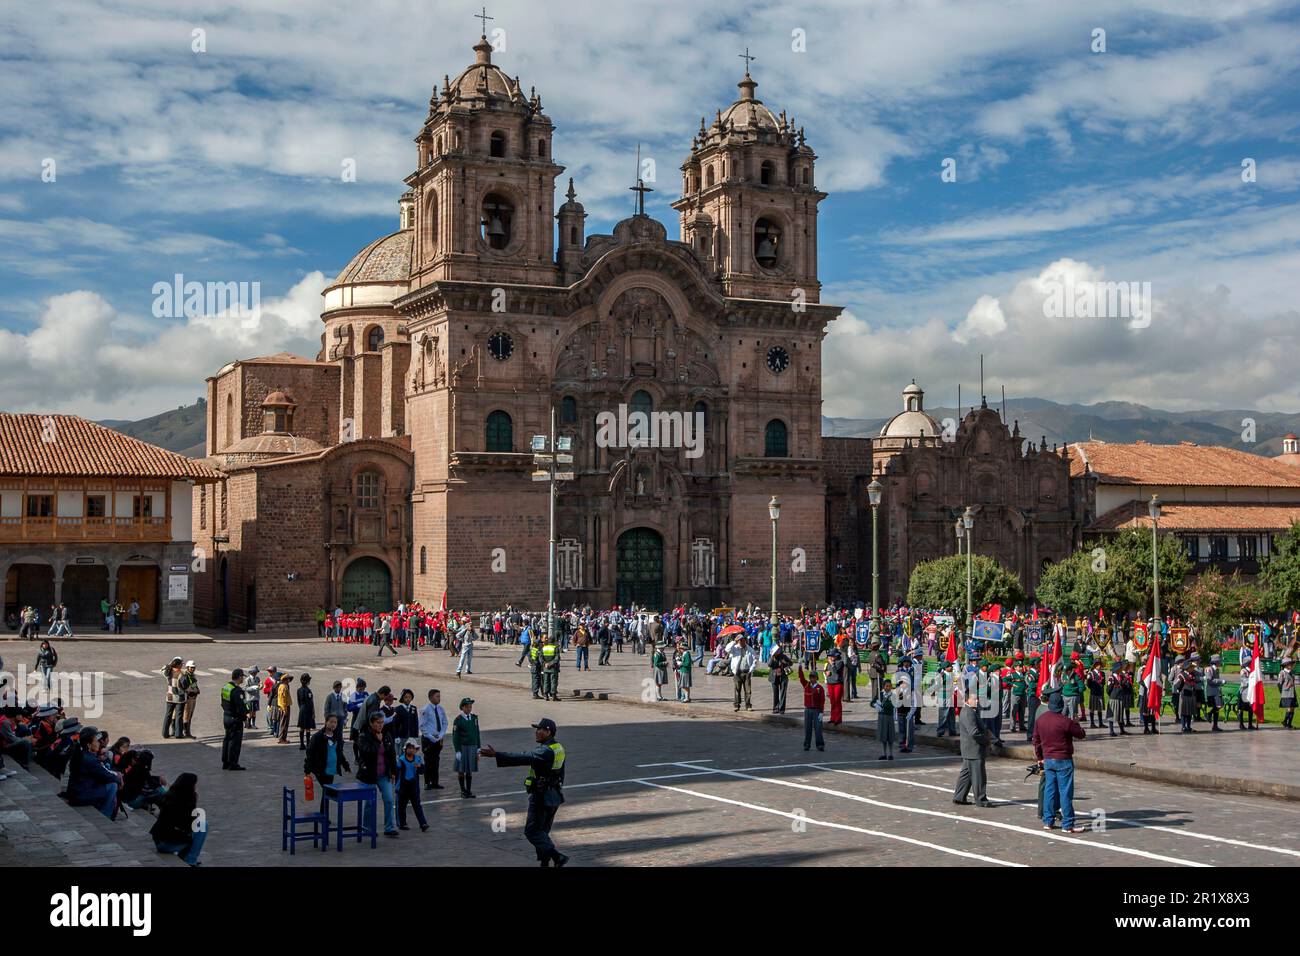 A parade takes place in front of The Church of the Society of Jesus at Plaza de Armas at Cusco in Peru. Stock Photo